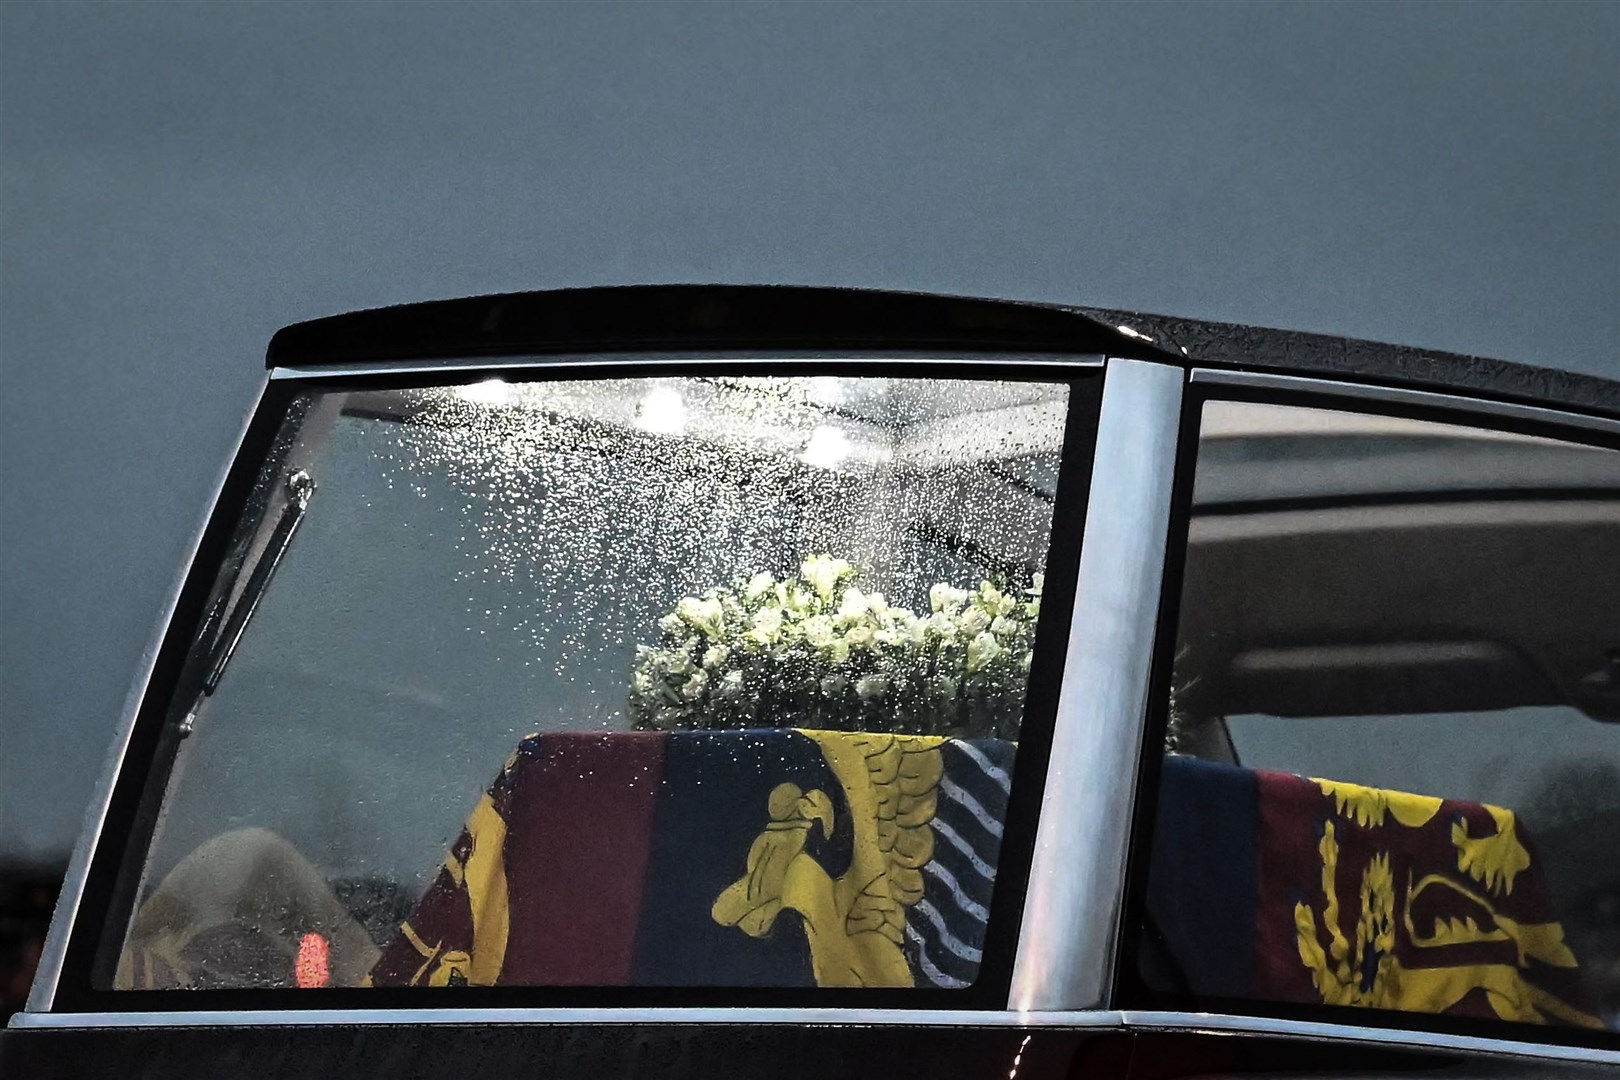 The Queen’s coffin illuminated with lights in the new state hearse (Ben Stansall/PA)